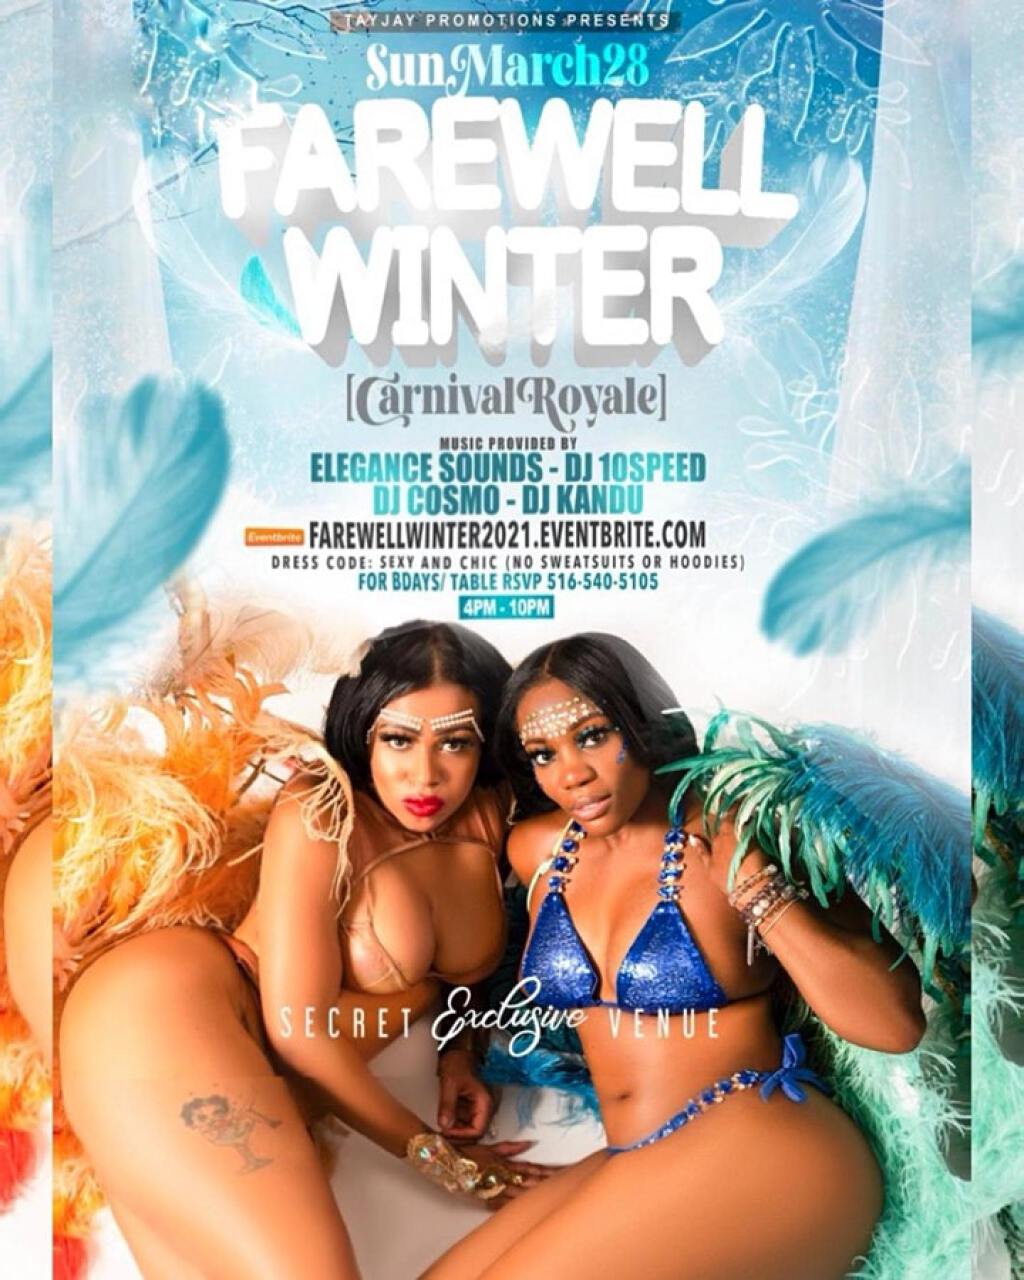 Farewell Winter: Carnival Royale flyer or graphic.